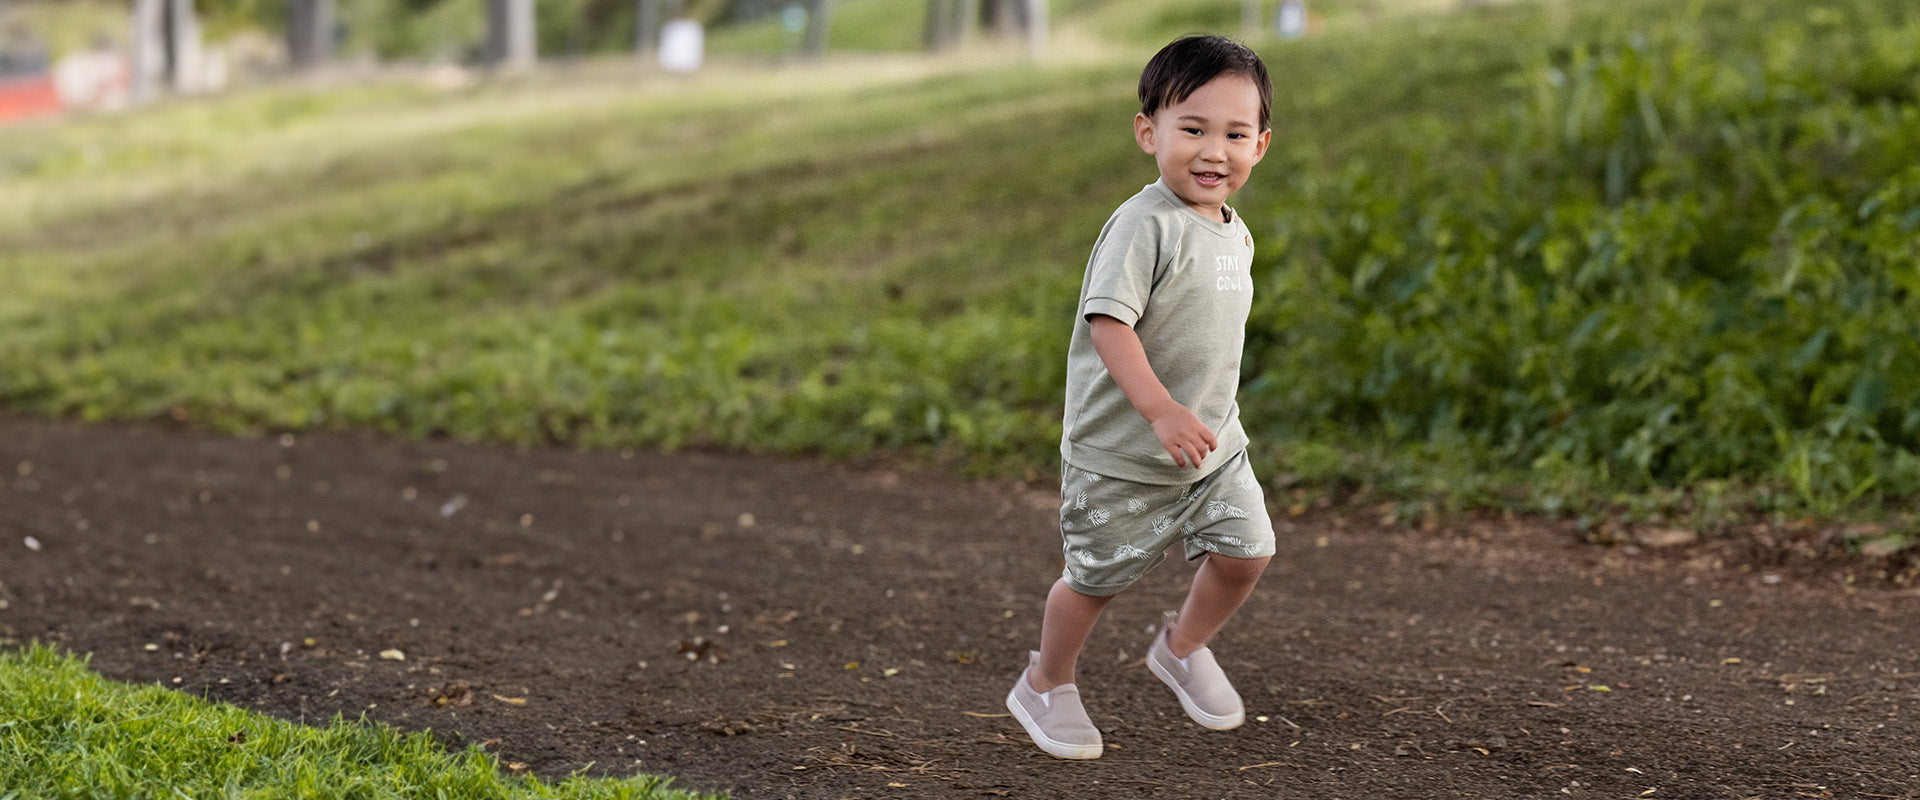 A young boy wearing a green t-shirt and shorts happily running on a dirt path in a park.